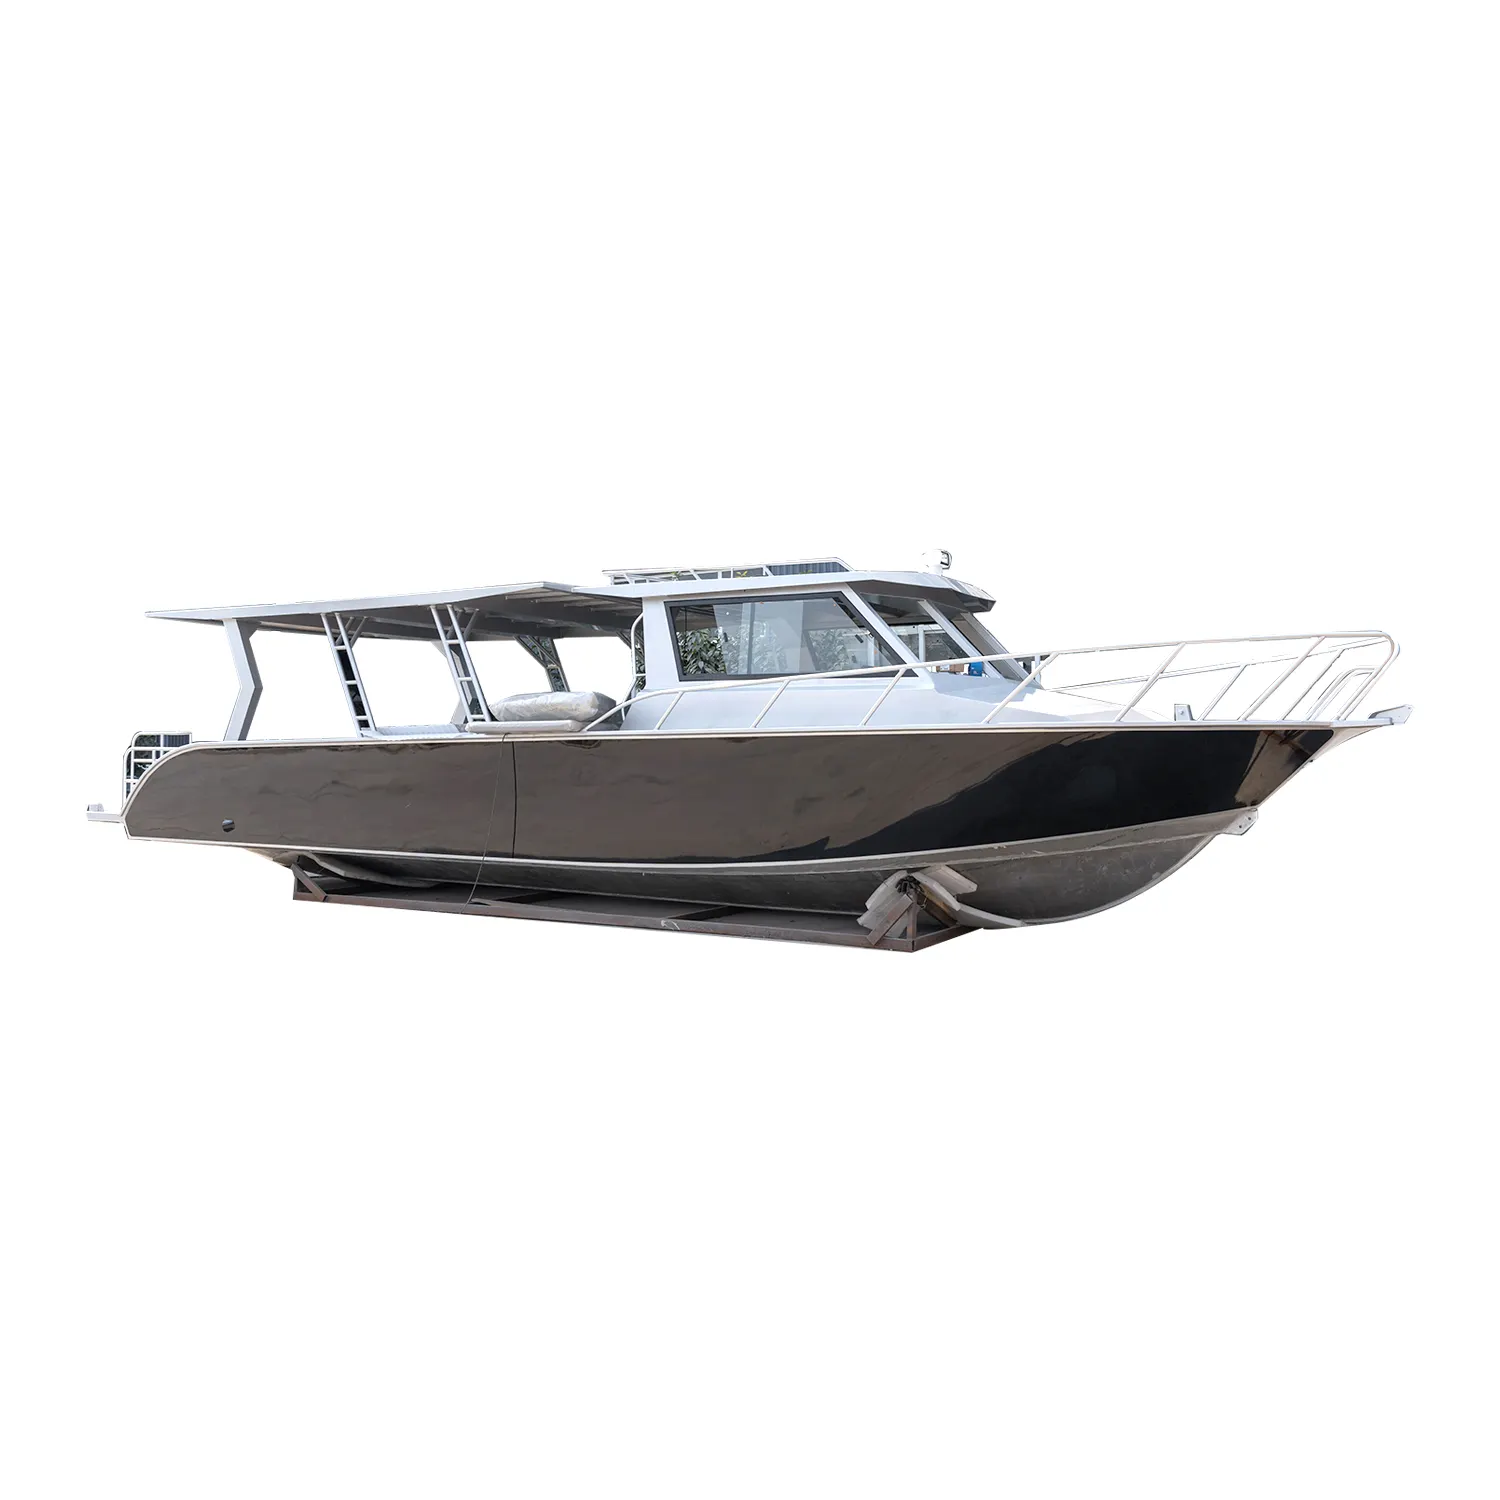 Gospel 11.6m/38ft lifestyle aluminum boat as fishing vessel and luxury yacht for sale